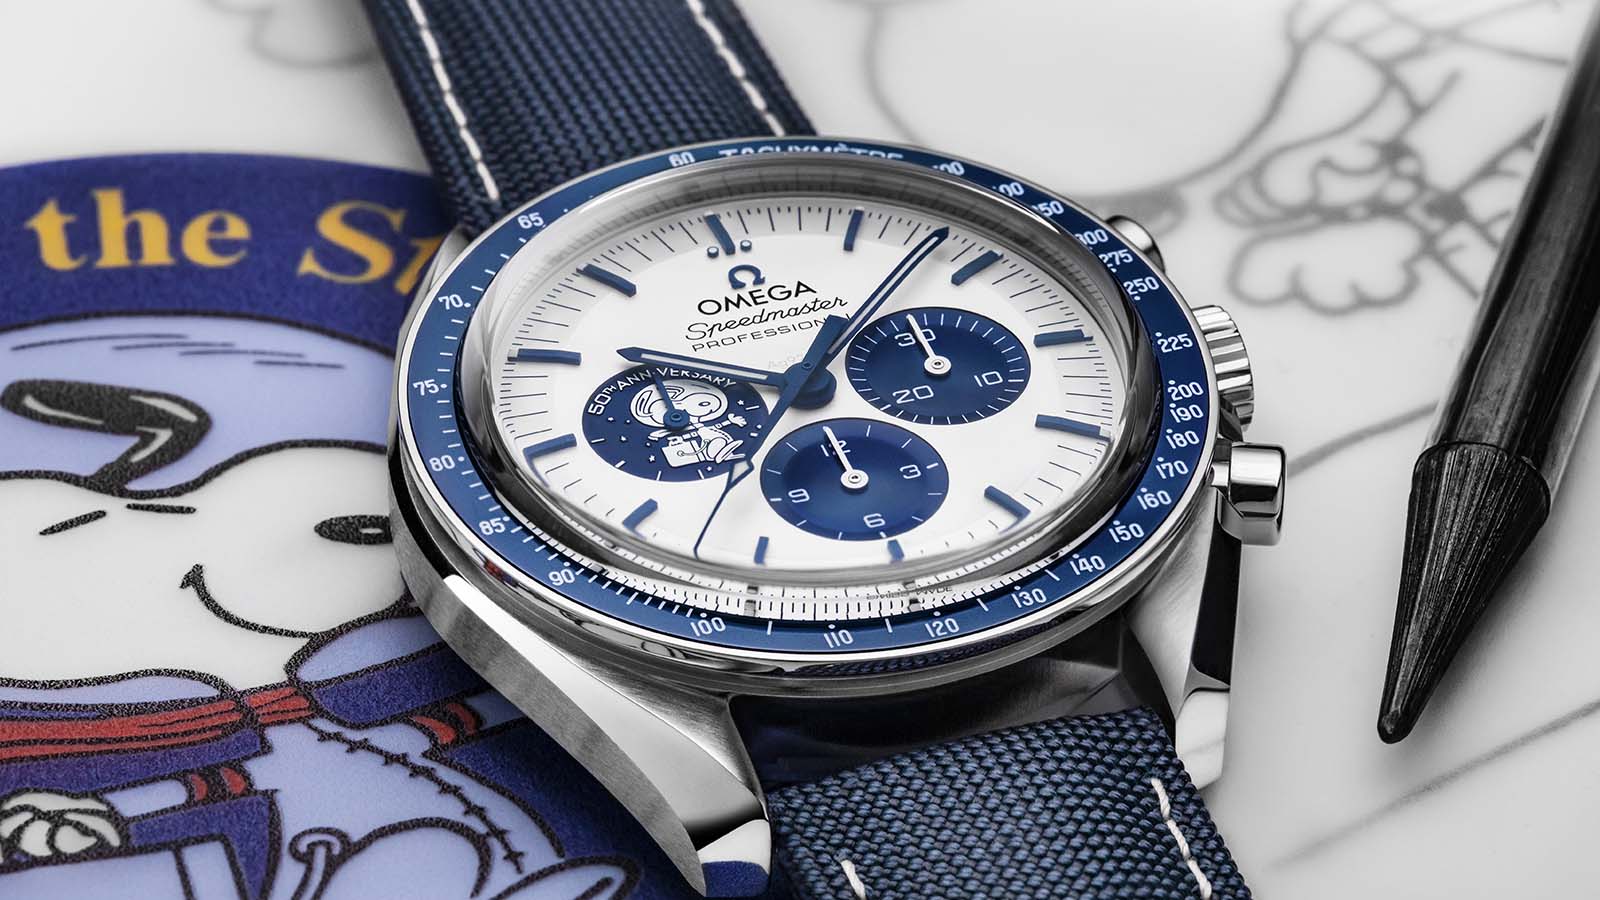 Why the hype? Omega's Speedmaster Silver Snoopy Award release explained